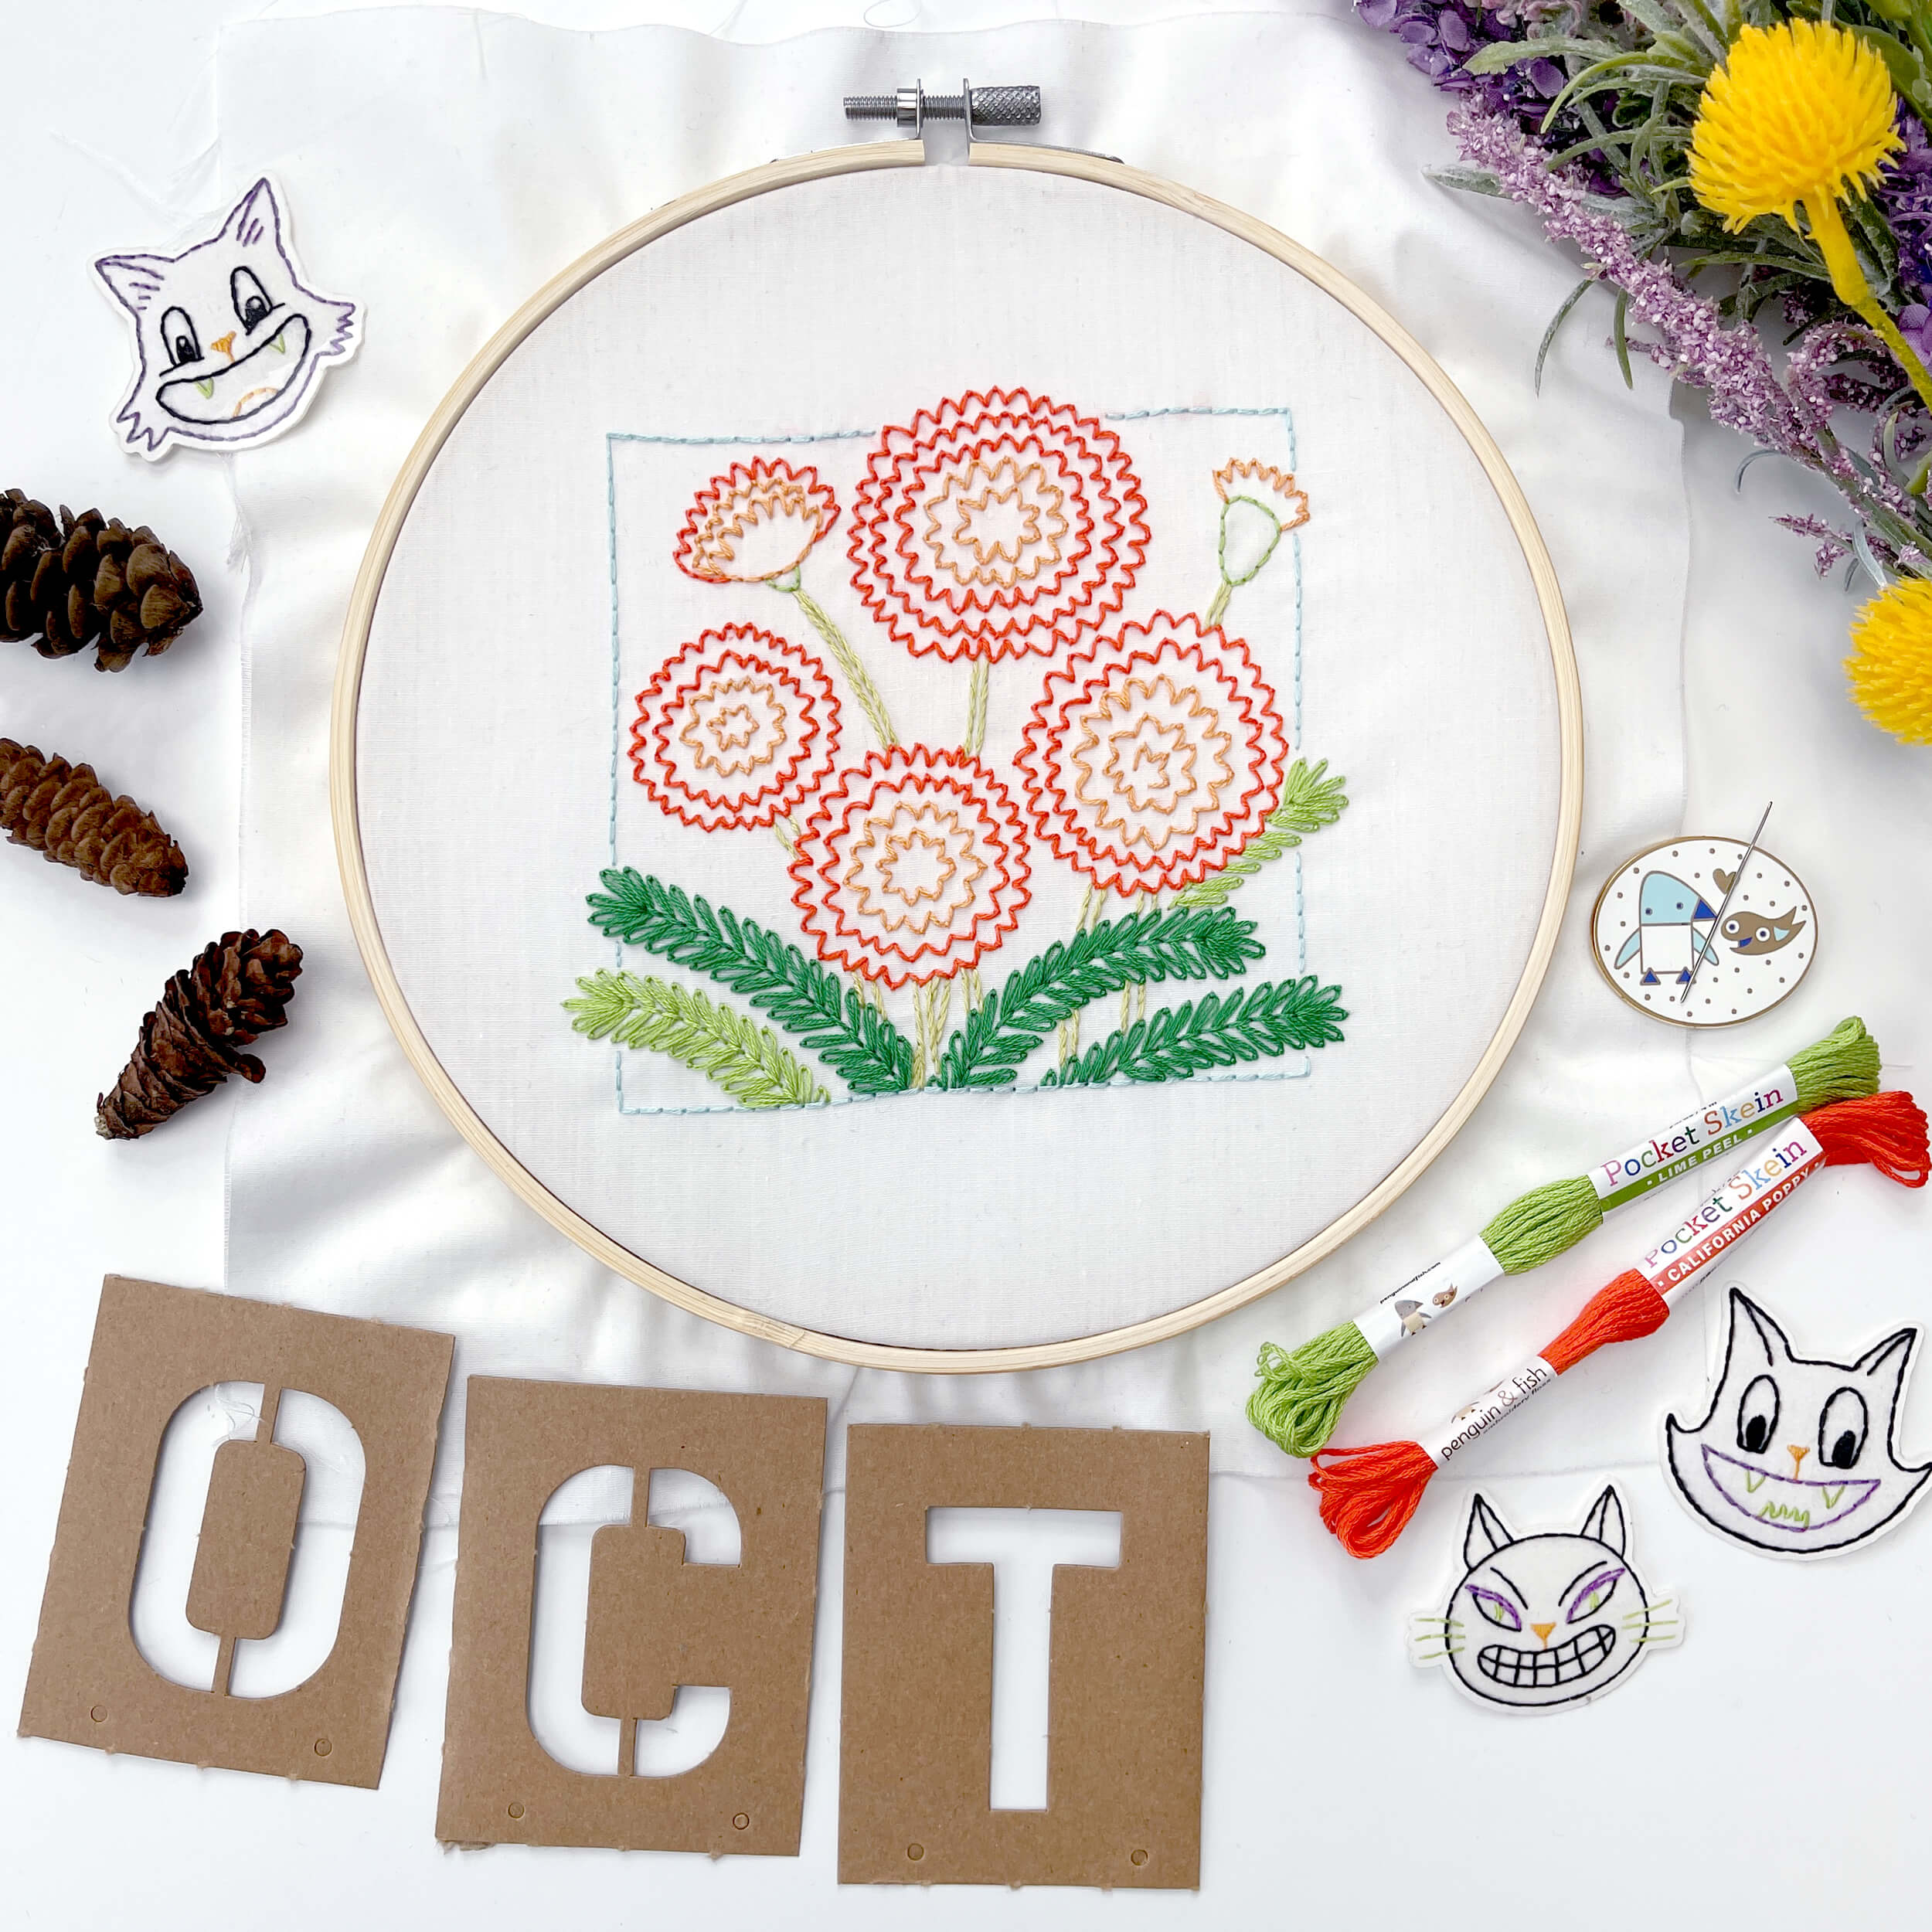 Finished October Marigold embroidery pattern with letters OCT under it